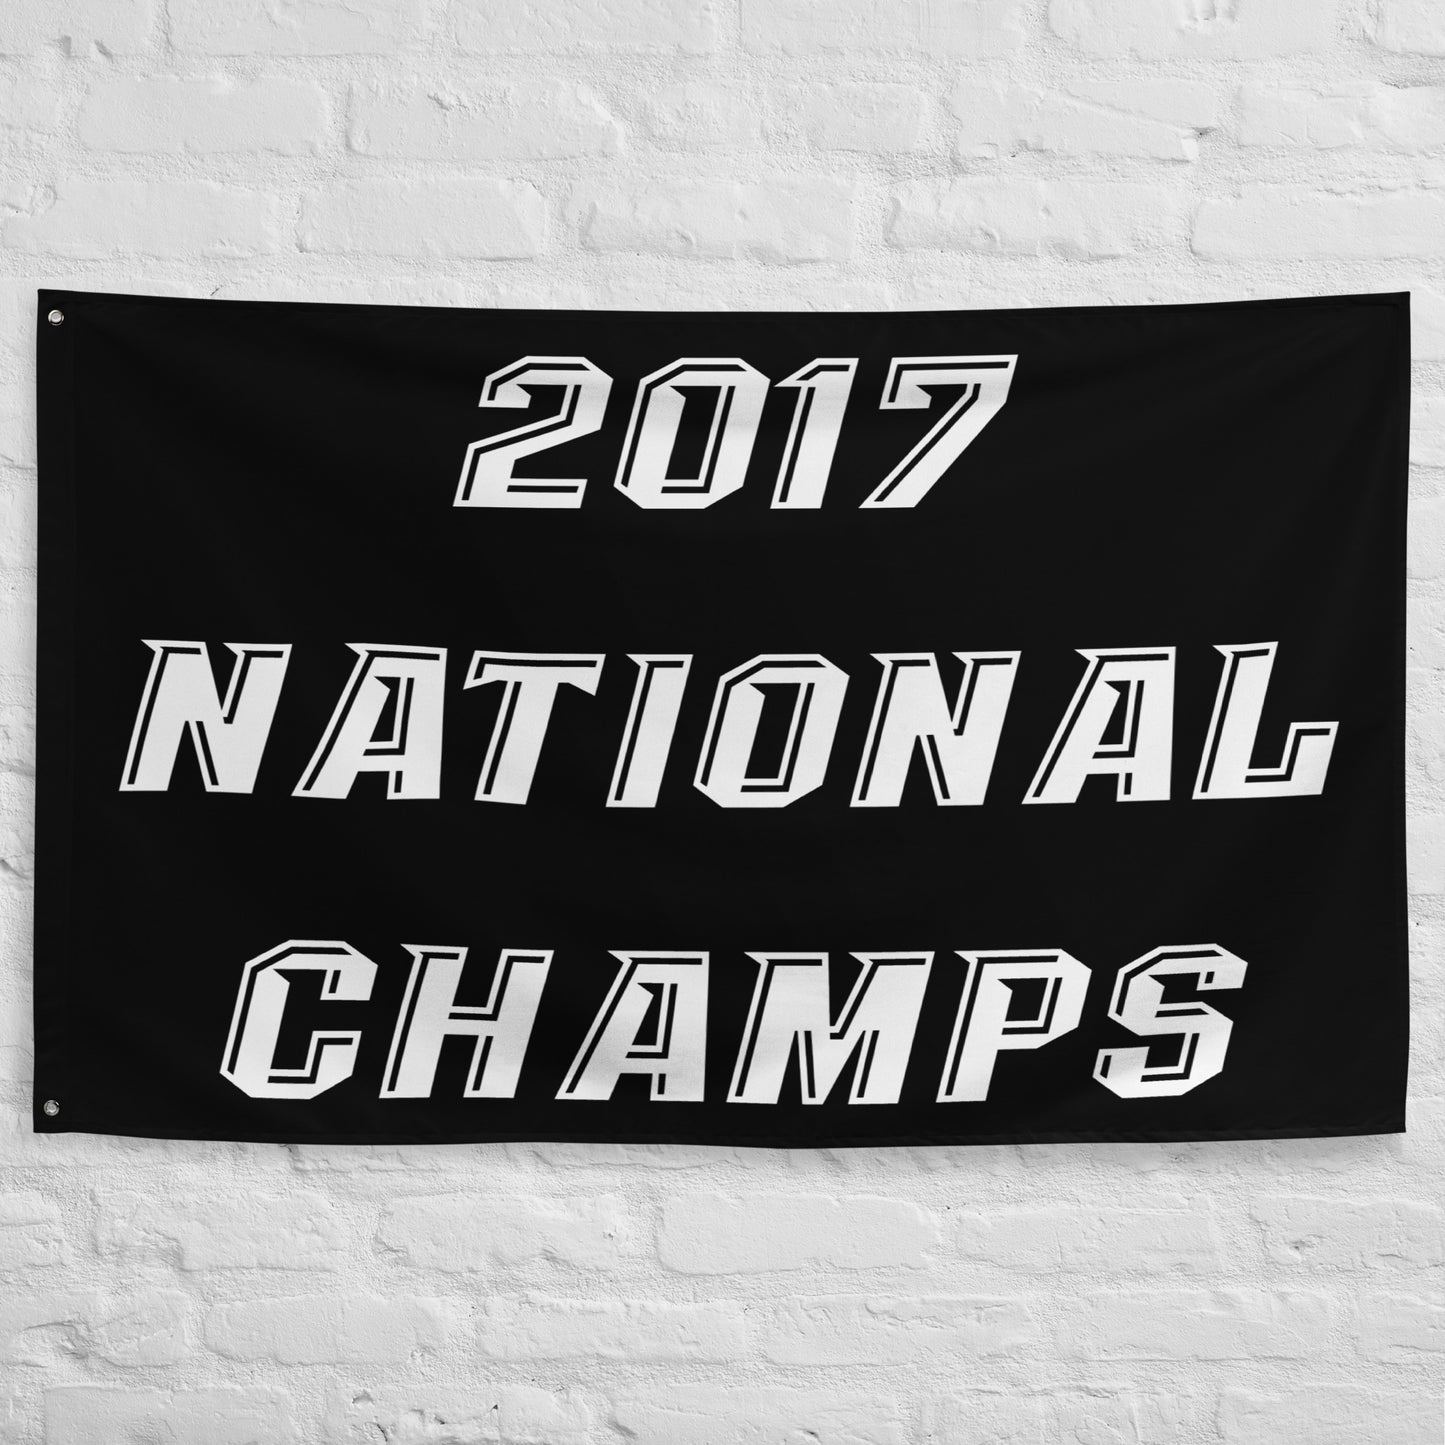 2017 UCF National Champs Flag - Black & White, UCF Flag, University of Central Florida, Charge On, Knights Flag, Gifts, Dorm